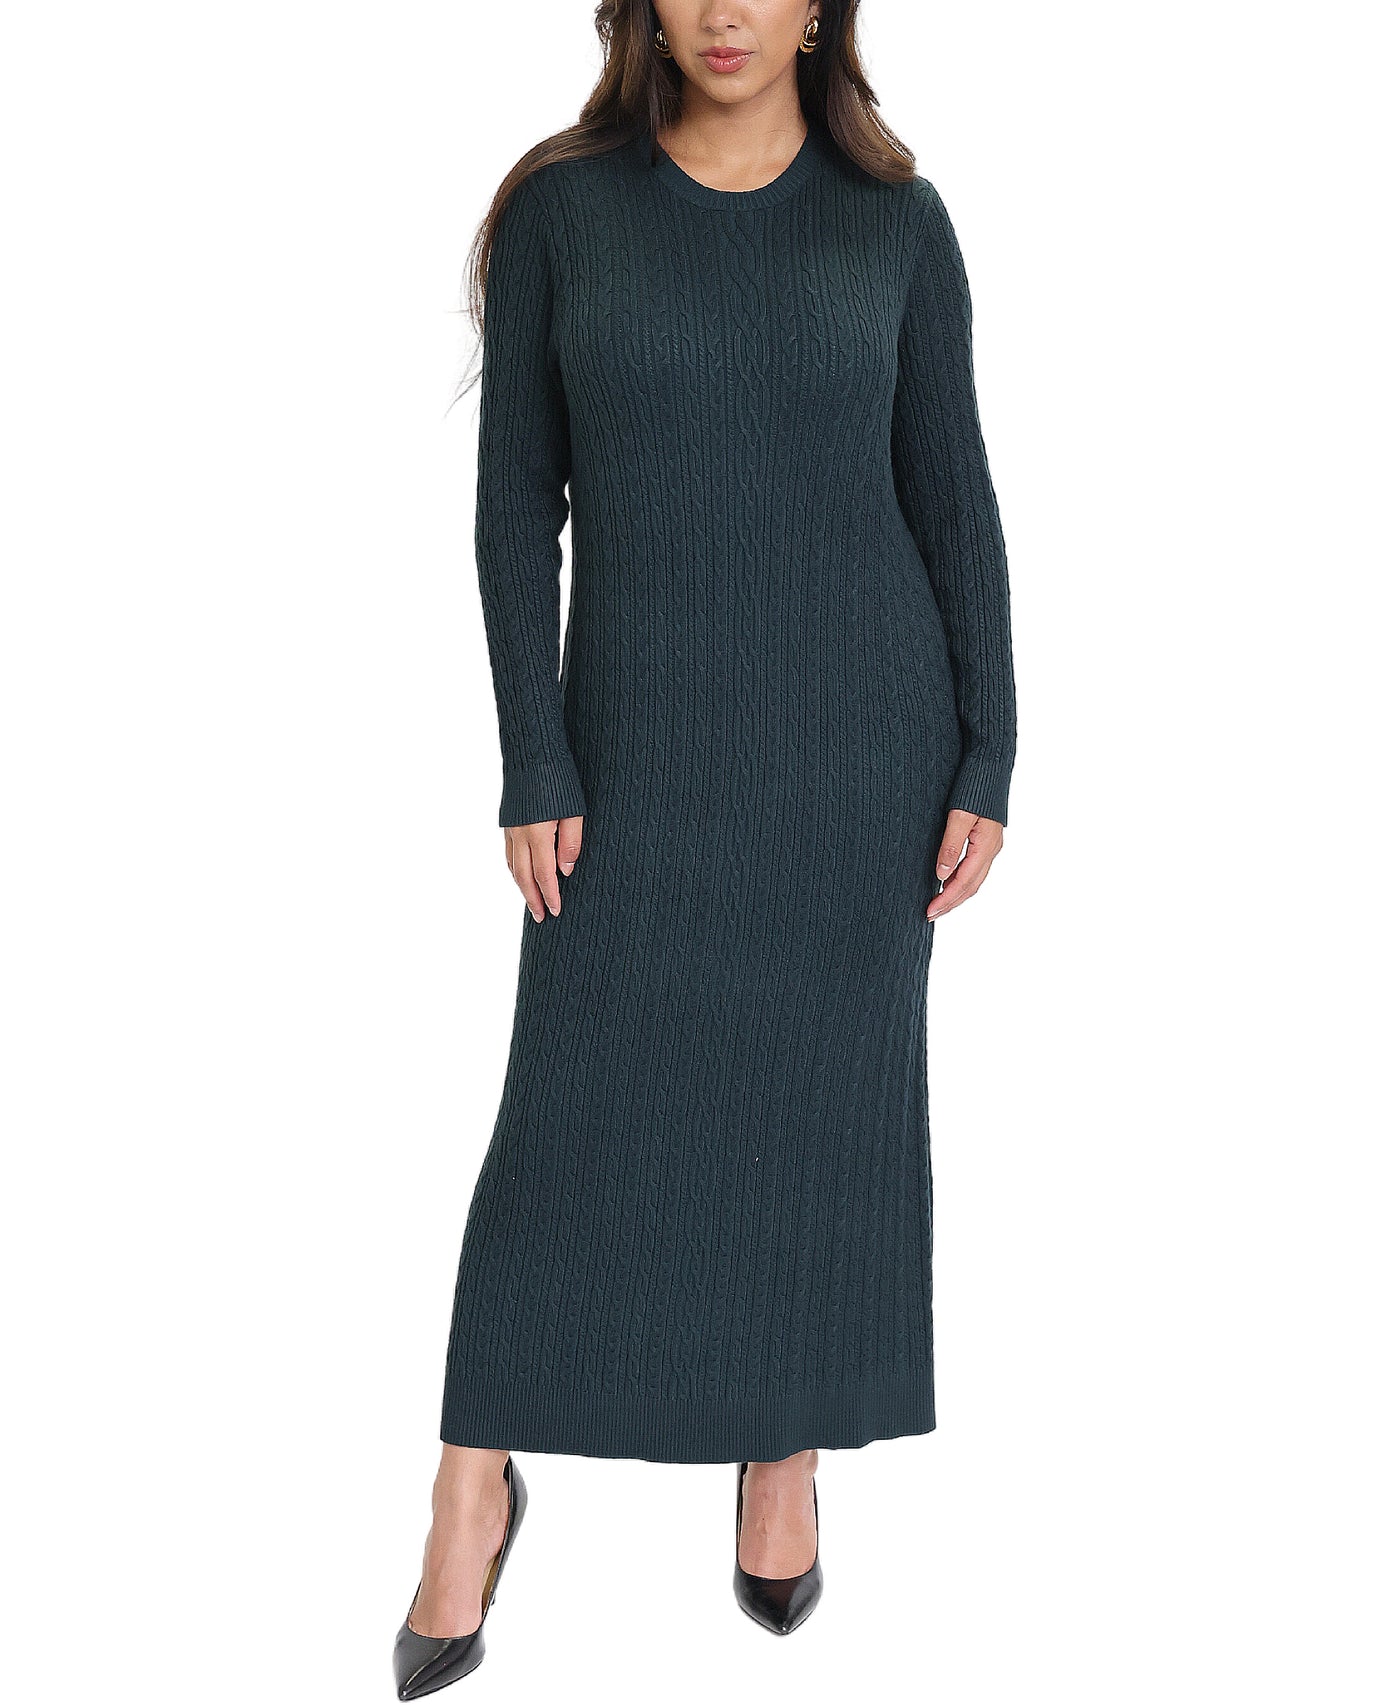 Cable Knit Sweater Dress image 1